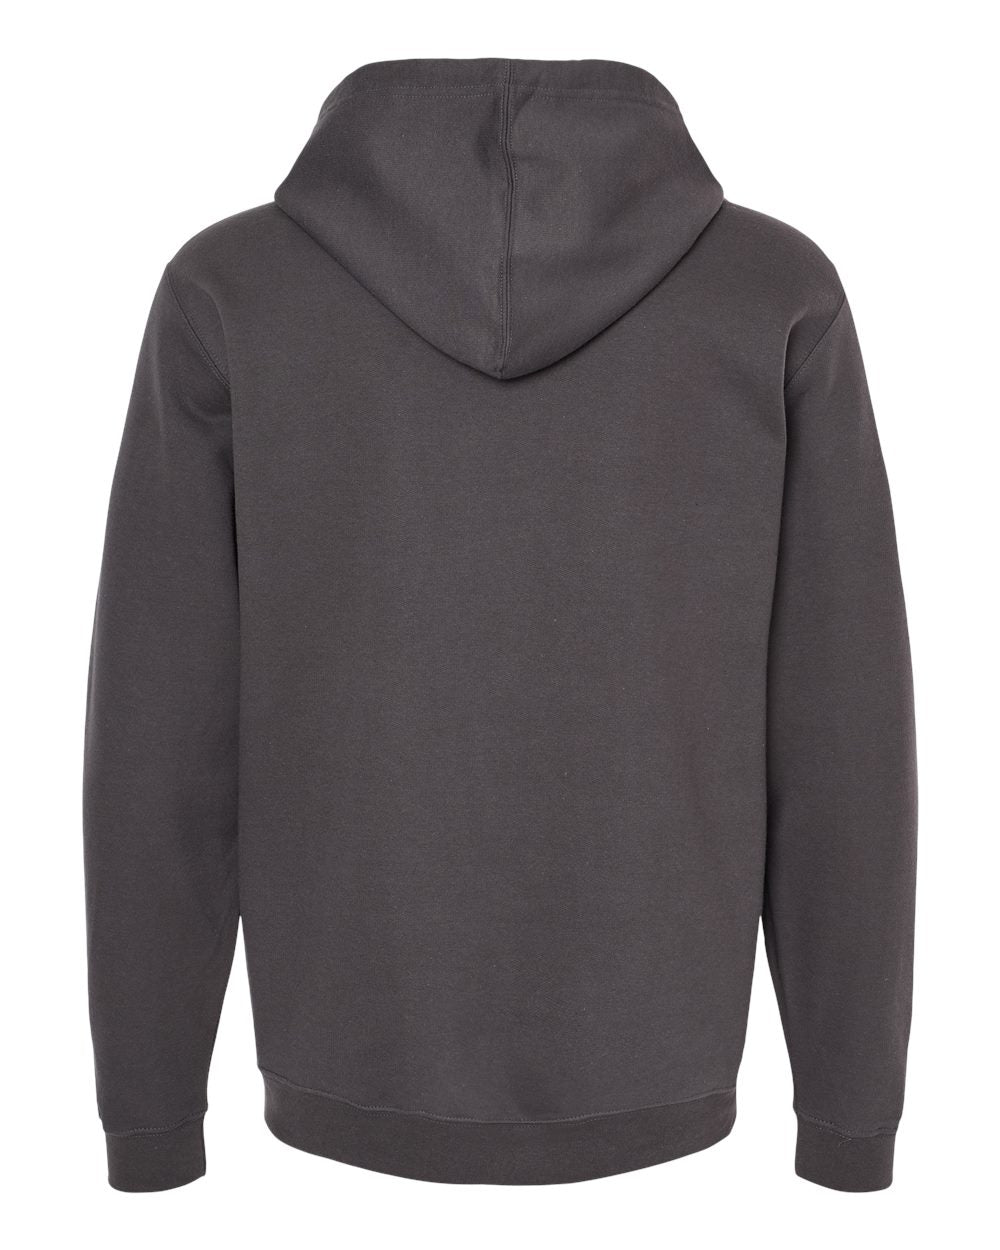 M&O Unisex Pullover Hoodie 3320 #color_Iron